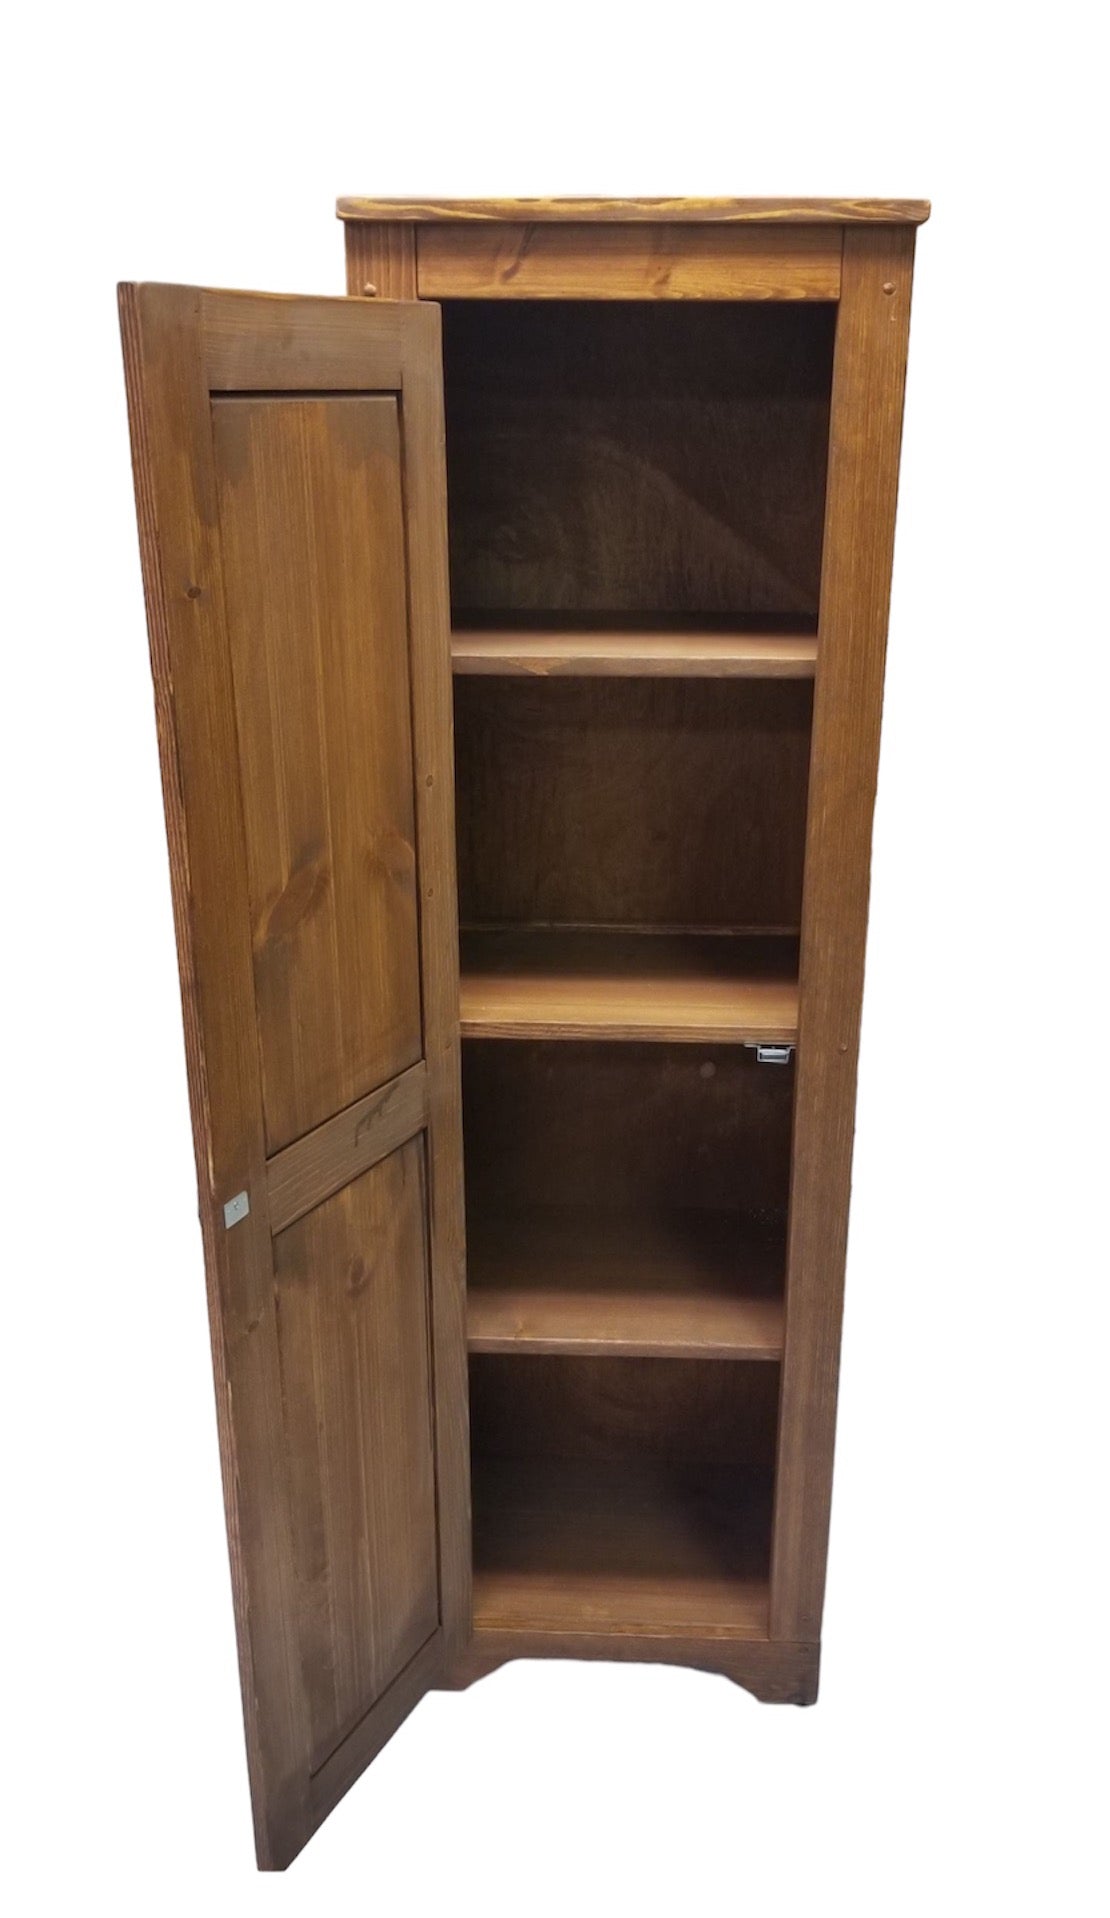 (CUSTOM SIZE) Tall Pine Pantry Cabinet, Two Piece Wood Pantry